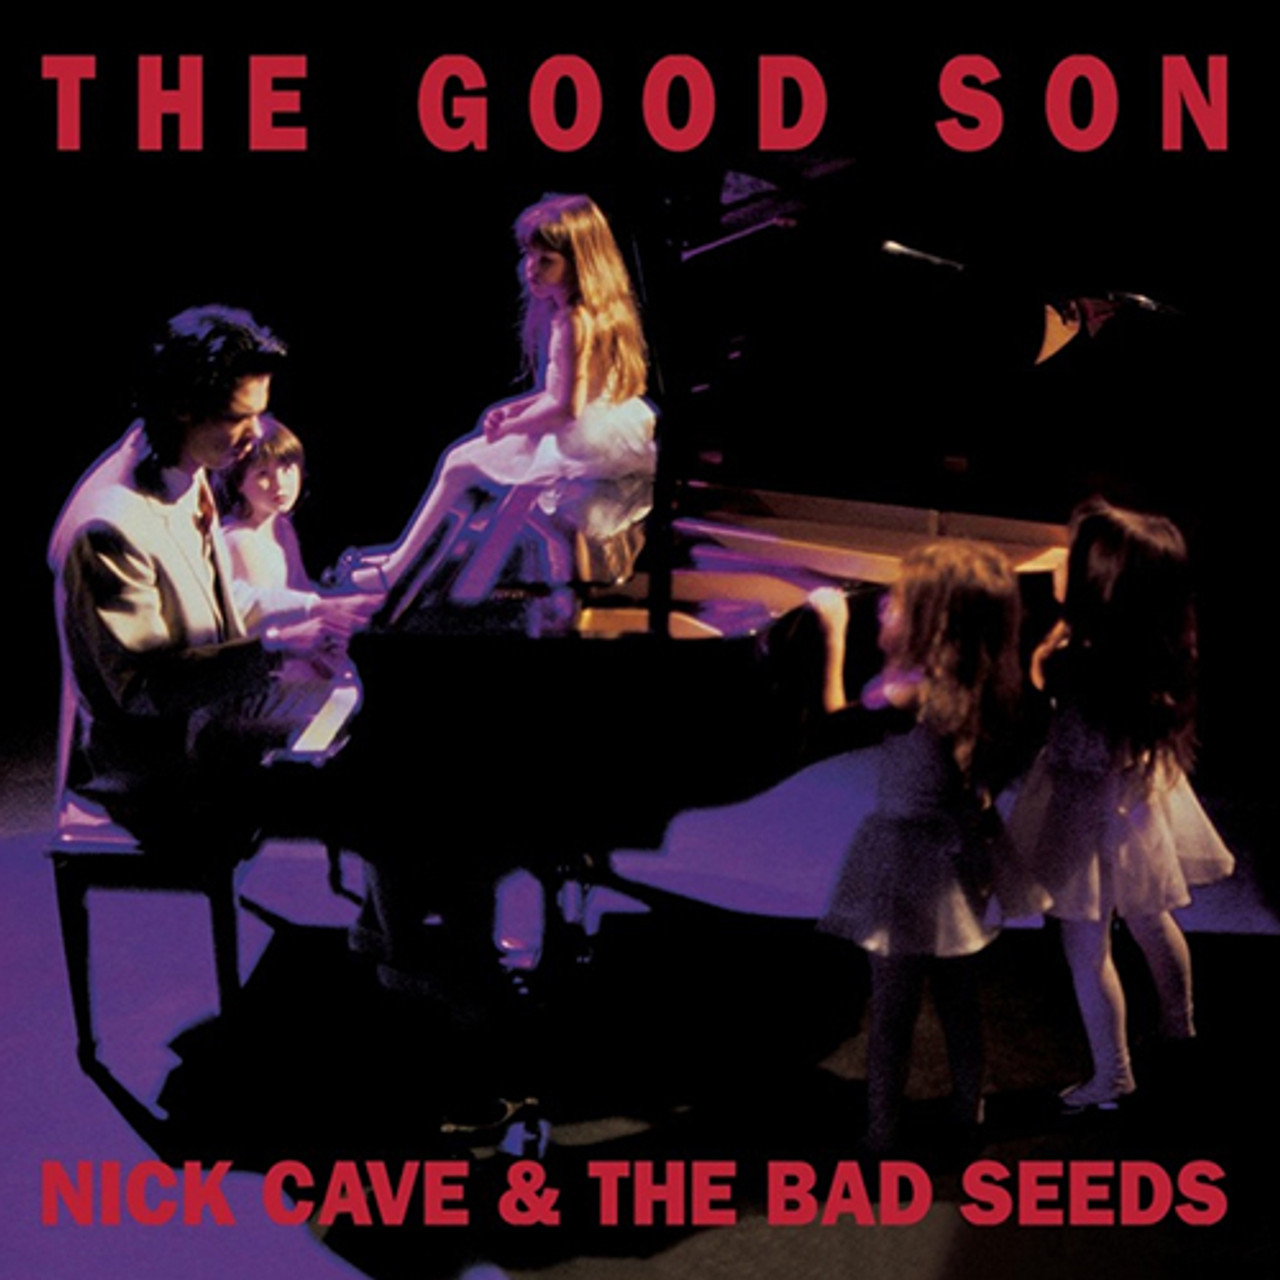 Nick & The Bad Seeds - The Son (Vinyl LP) - Music Direct